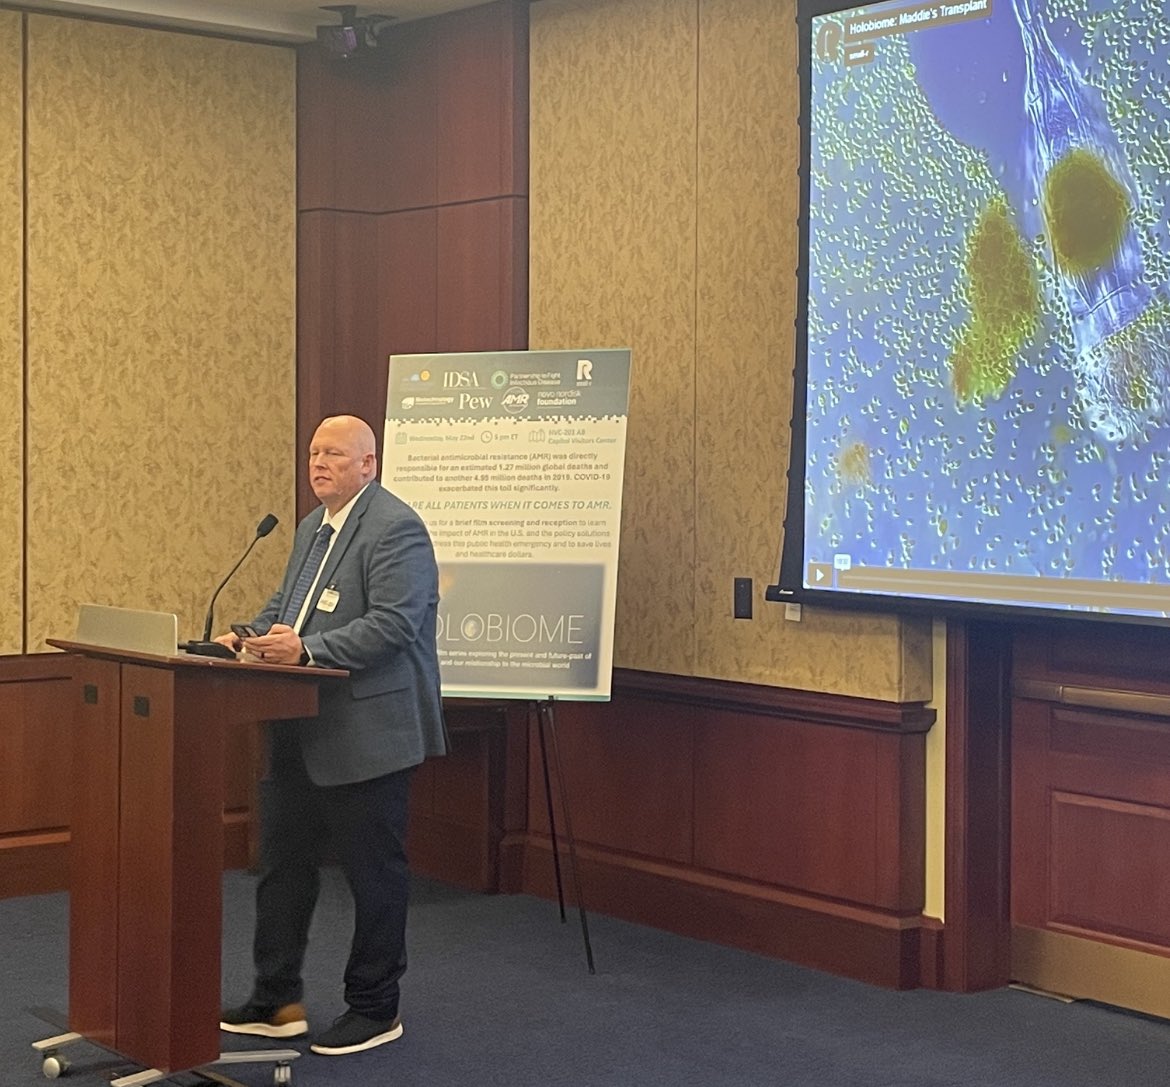 .@purdiedad73 is a patient advocate who lives w/ #ValleyFever & is a member of @WHO’s #AMR Survivor Task Force. Huge thanks to Rob for talking the talk & walking the walk on the Hill this week to educate & motivate #Congress to #SquashSuperbugs & #PassPASTEUR. #HolobiomeontheHill